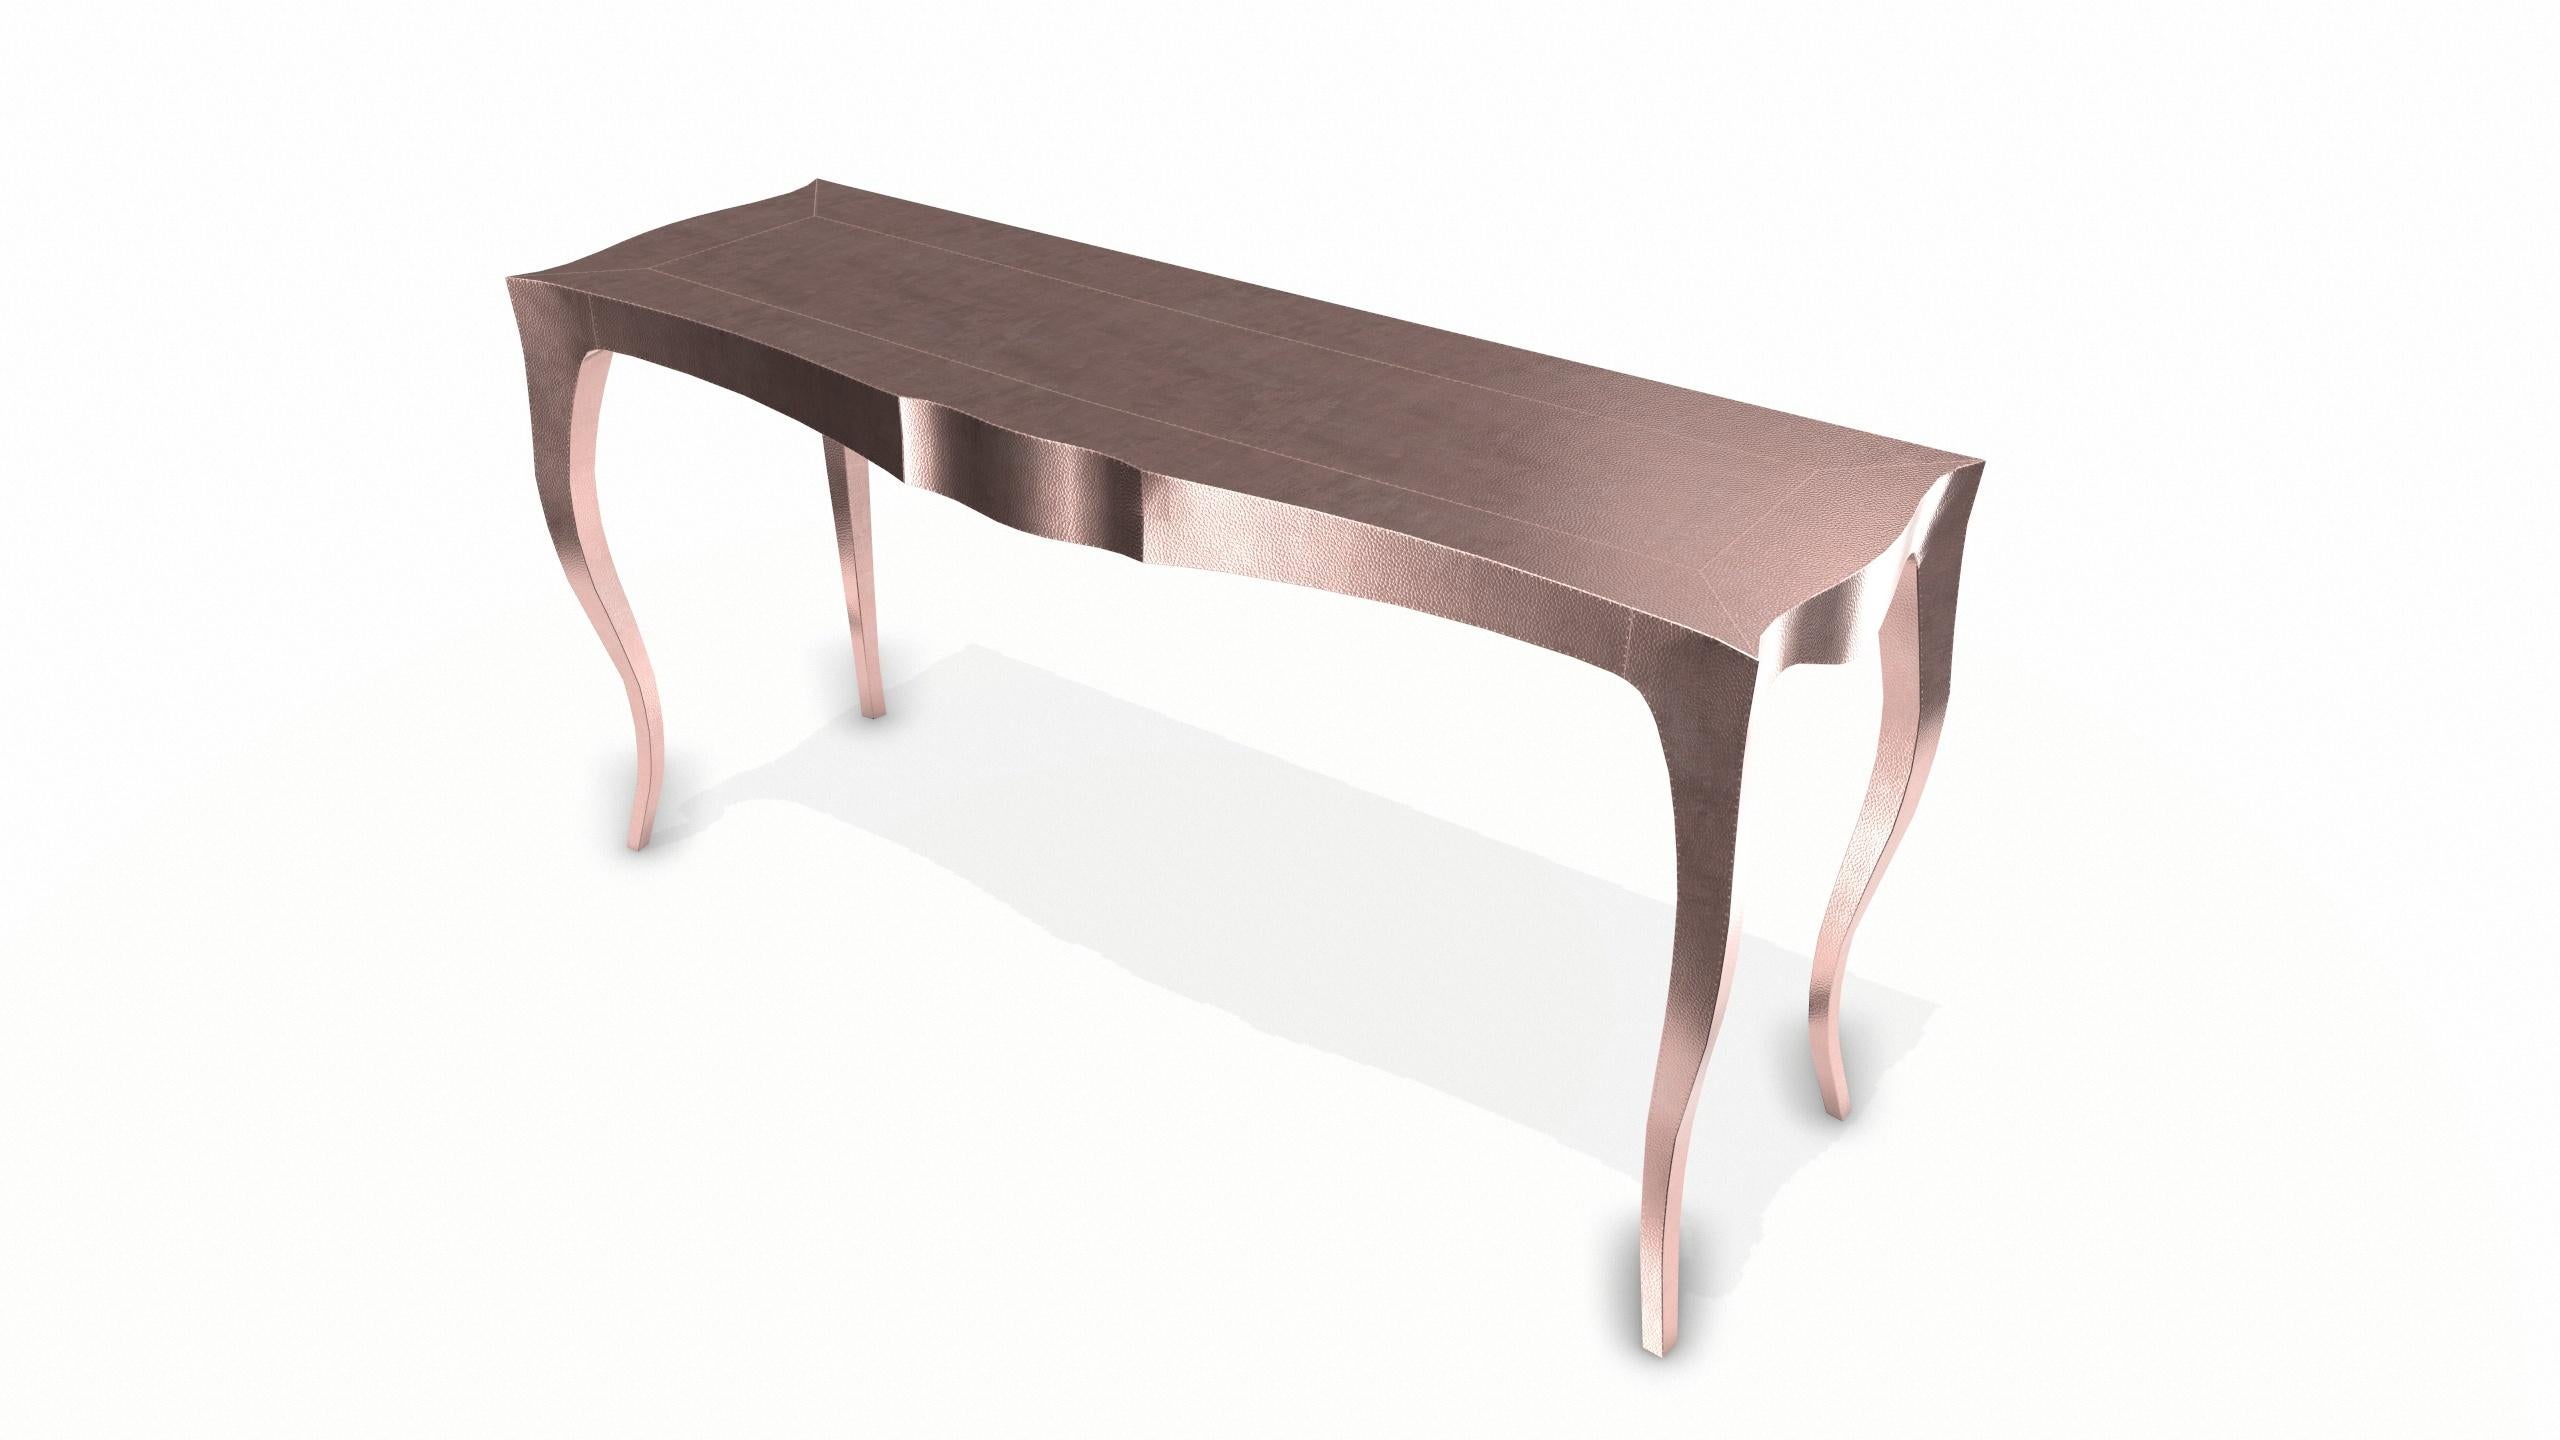 Other Louise Console Art Nouveau Tray Tables Mid. Hammered Copper by Paul Mathieu  For Sale